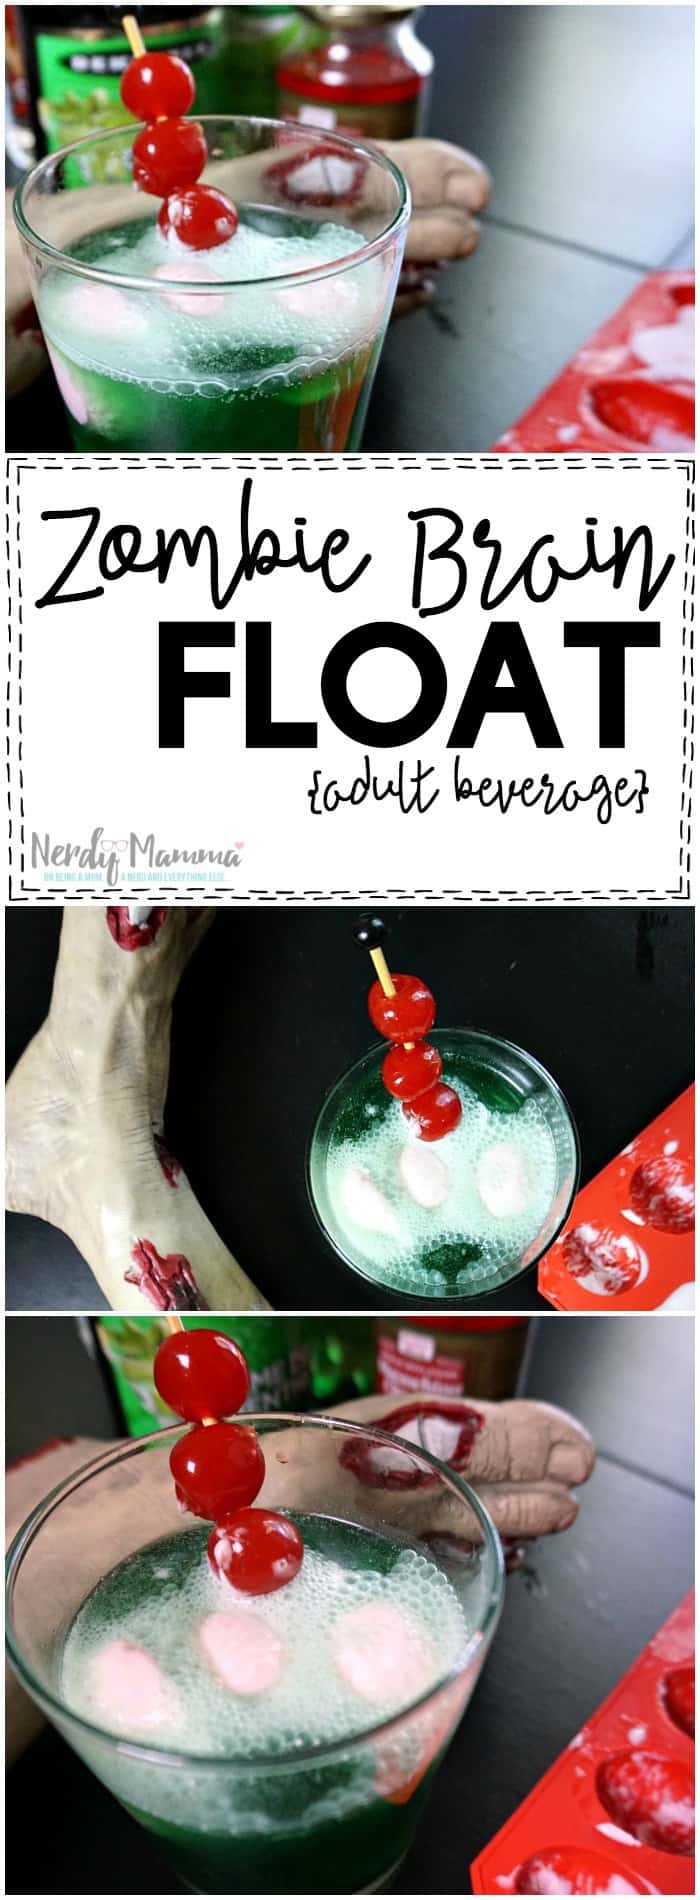 OMG! I love this recipe for this adult Zombie Brain Float SO MUCH! It's so funny. And sounds so easy (and tasty). I have to try it.